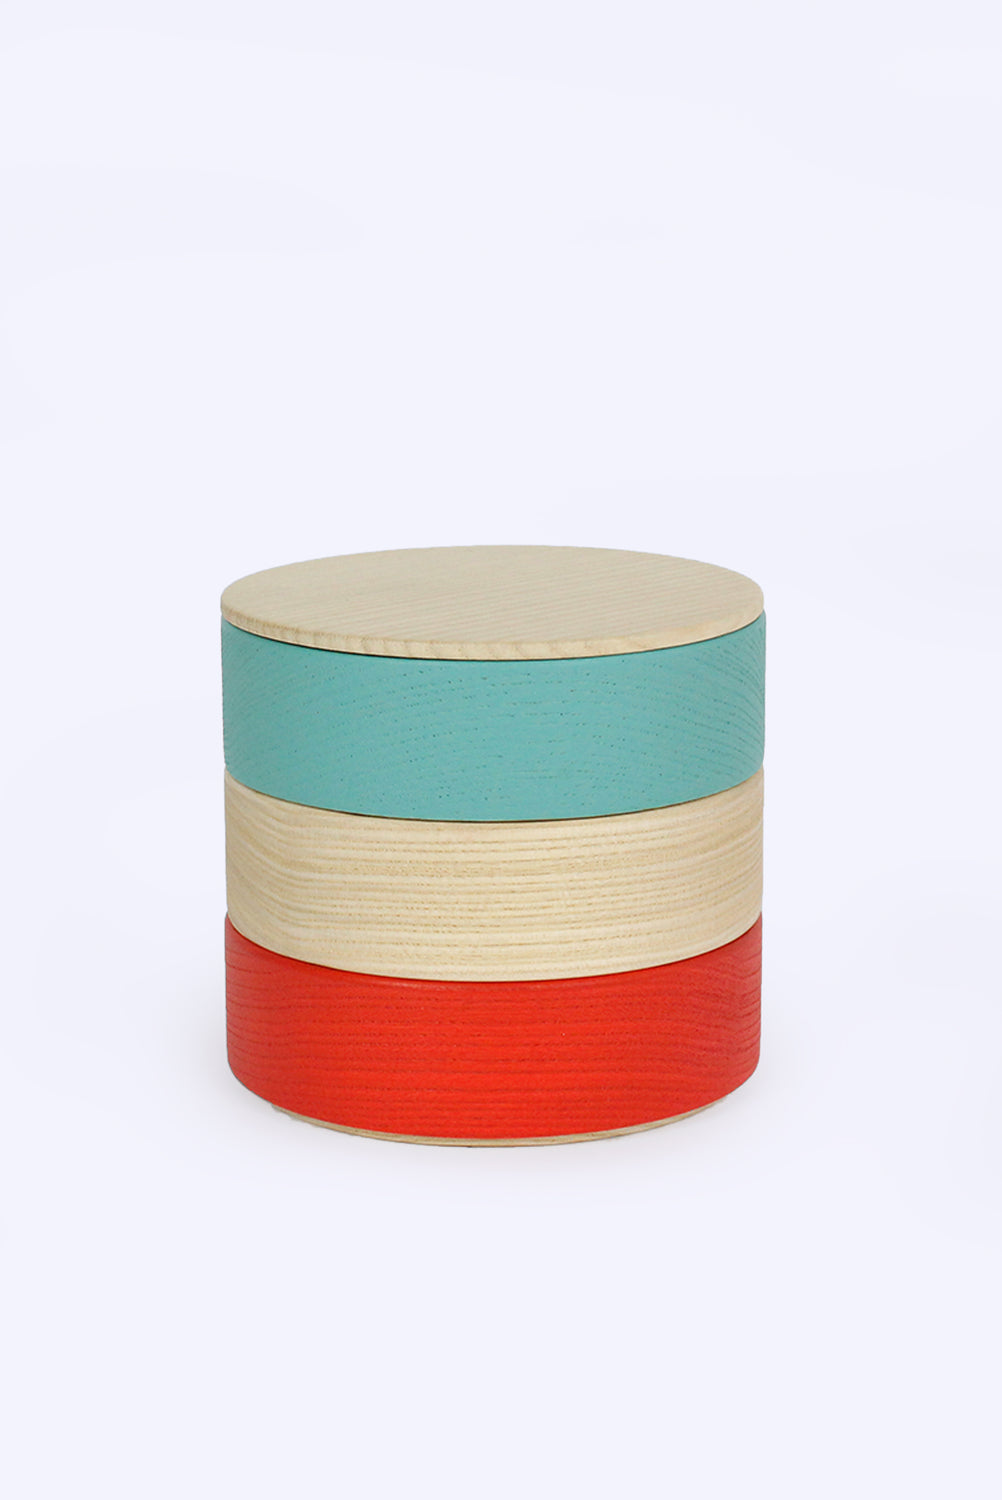 Border 3-Tier Containers, Turquoise